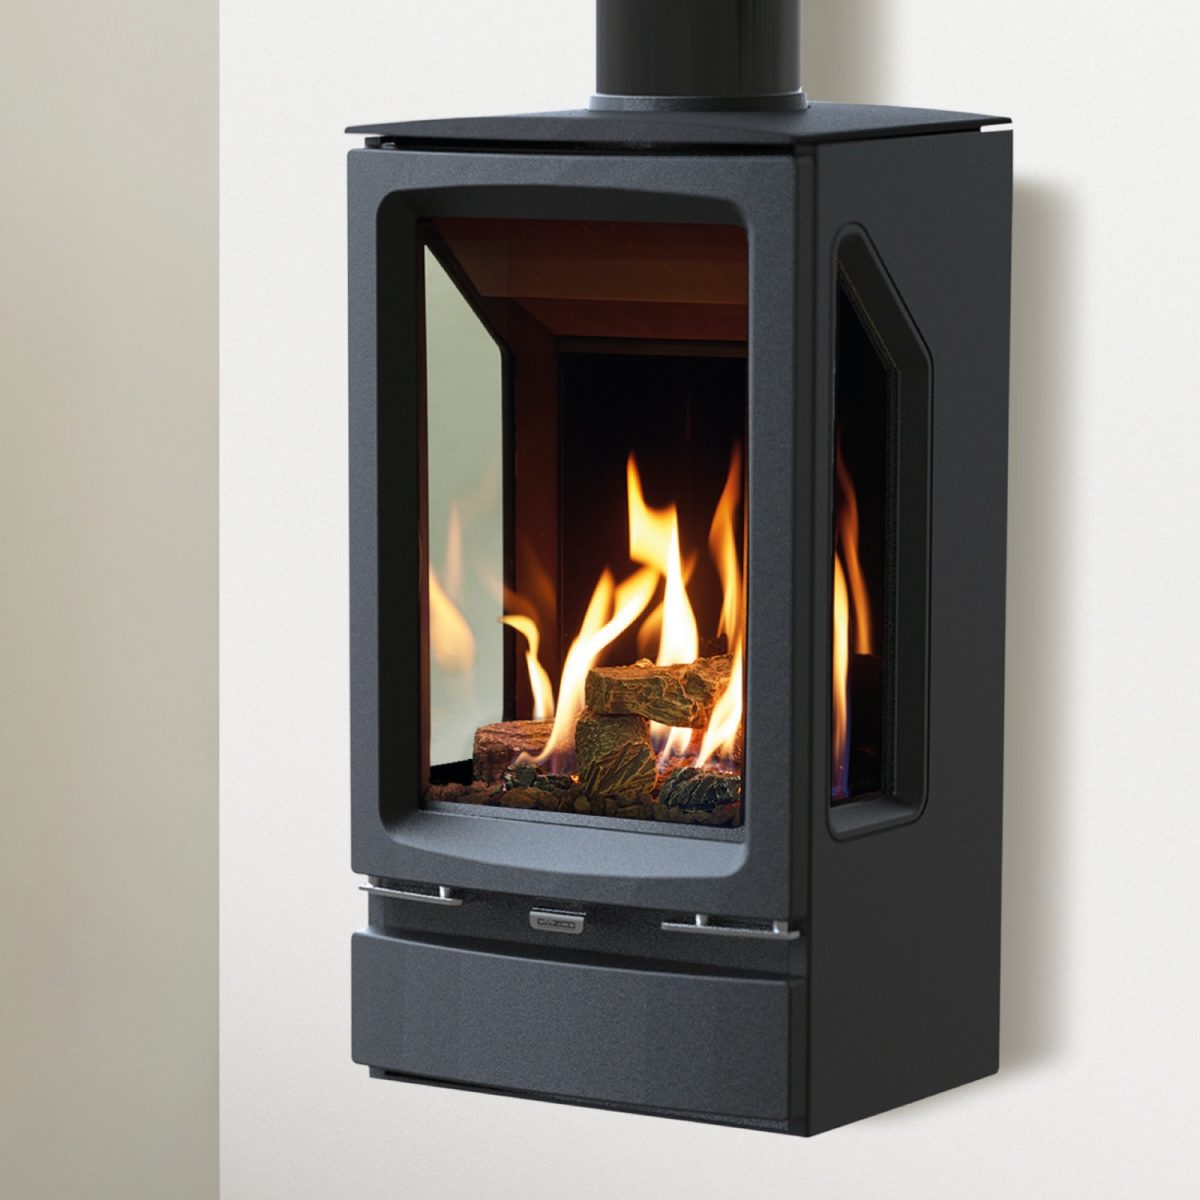 Gazco Vogue Midi T Wall Mounted, 3 Sided, Black Glass Lining, Natural Gas, Balanced Flue Stove